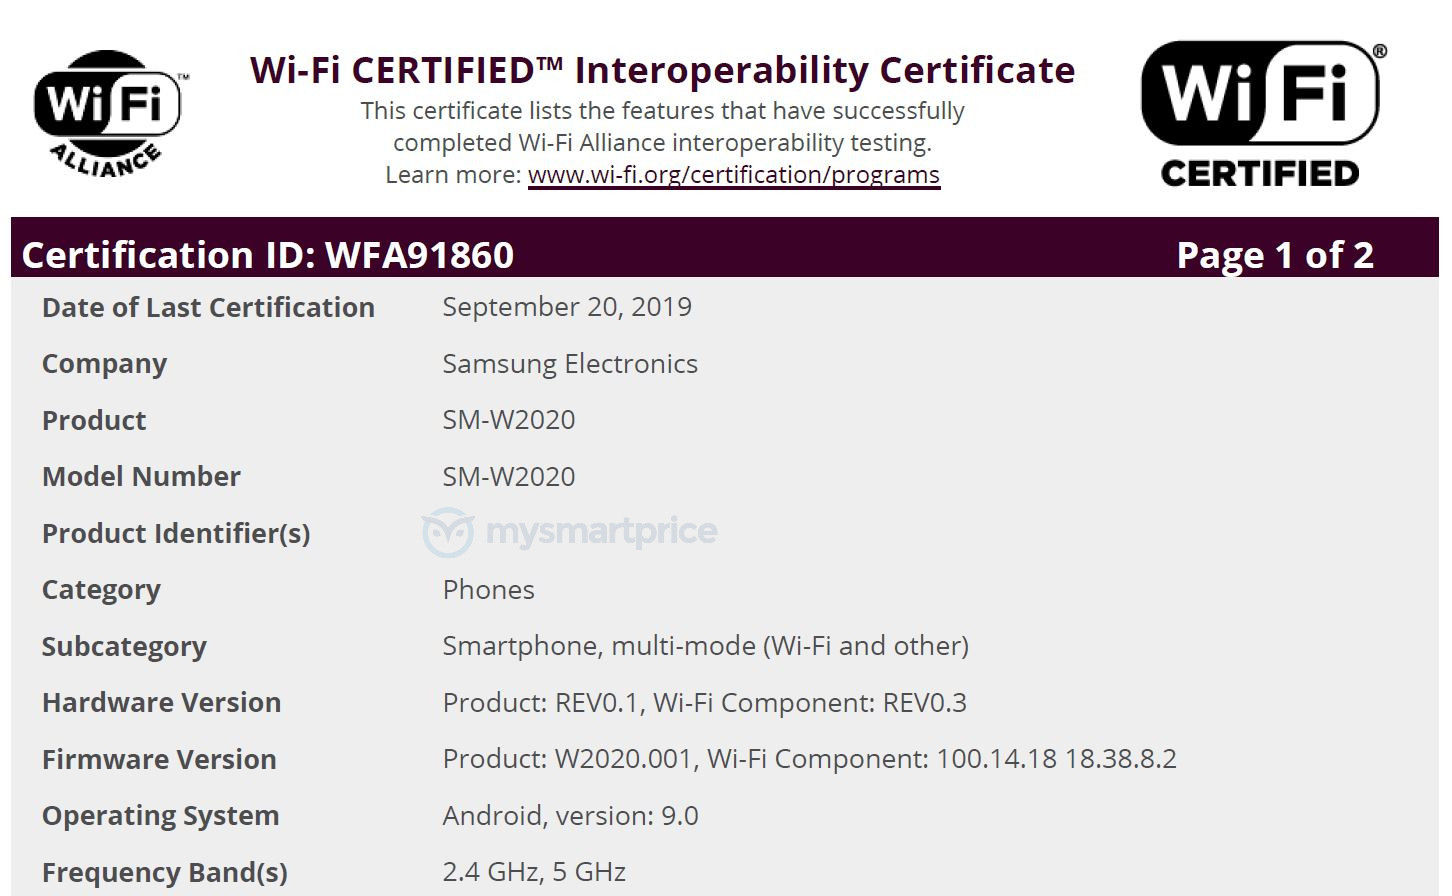 Samsung SM-W2020 Flip Phone Certified by Wi-Fi Alliance, Hints at